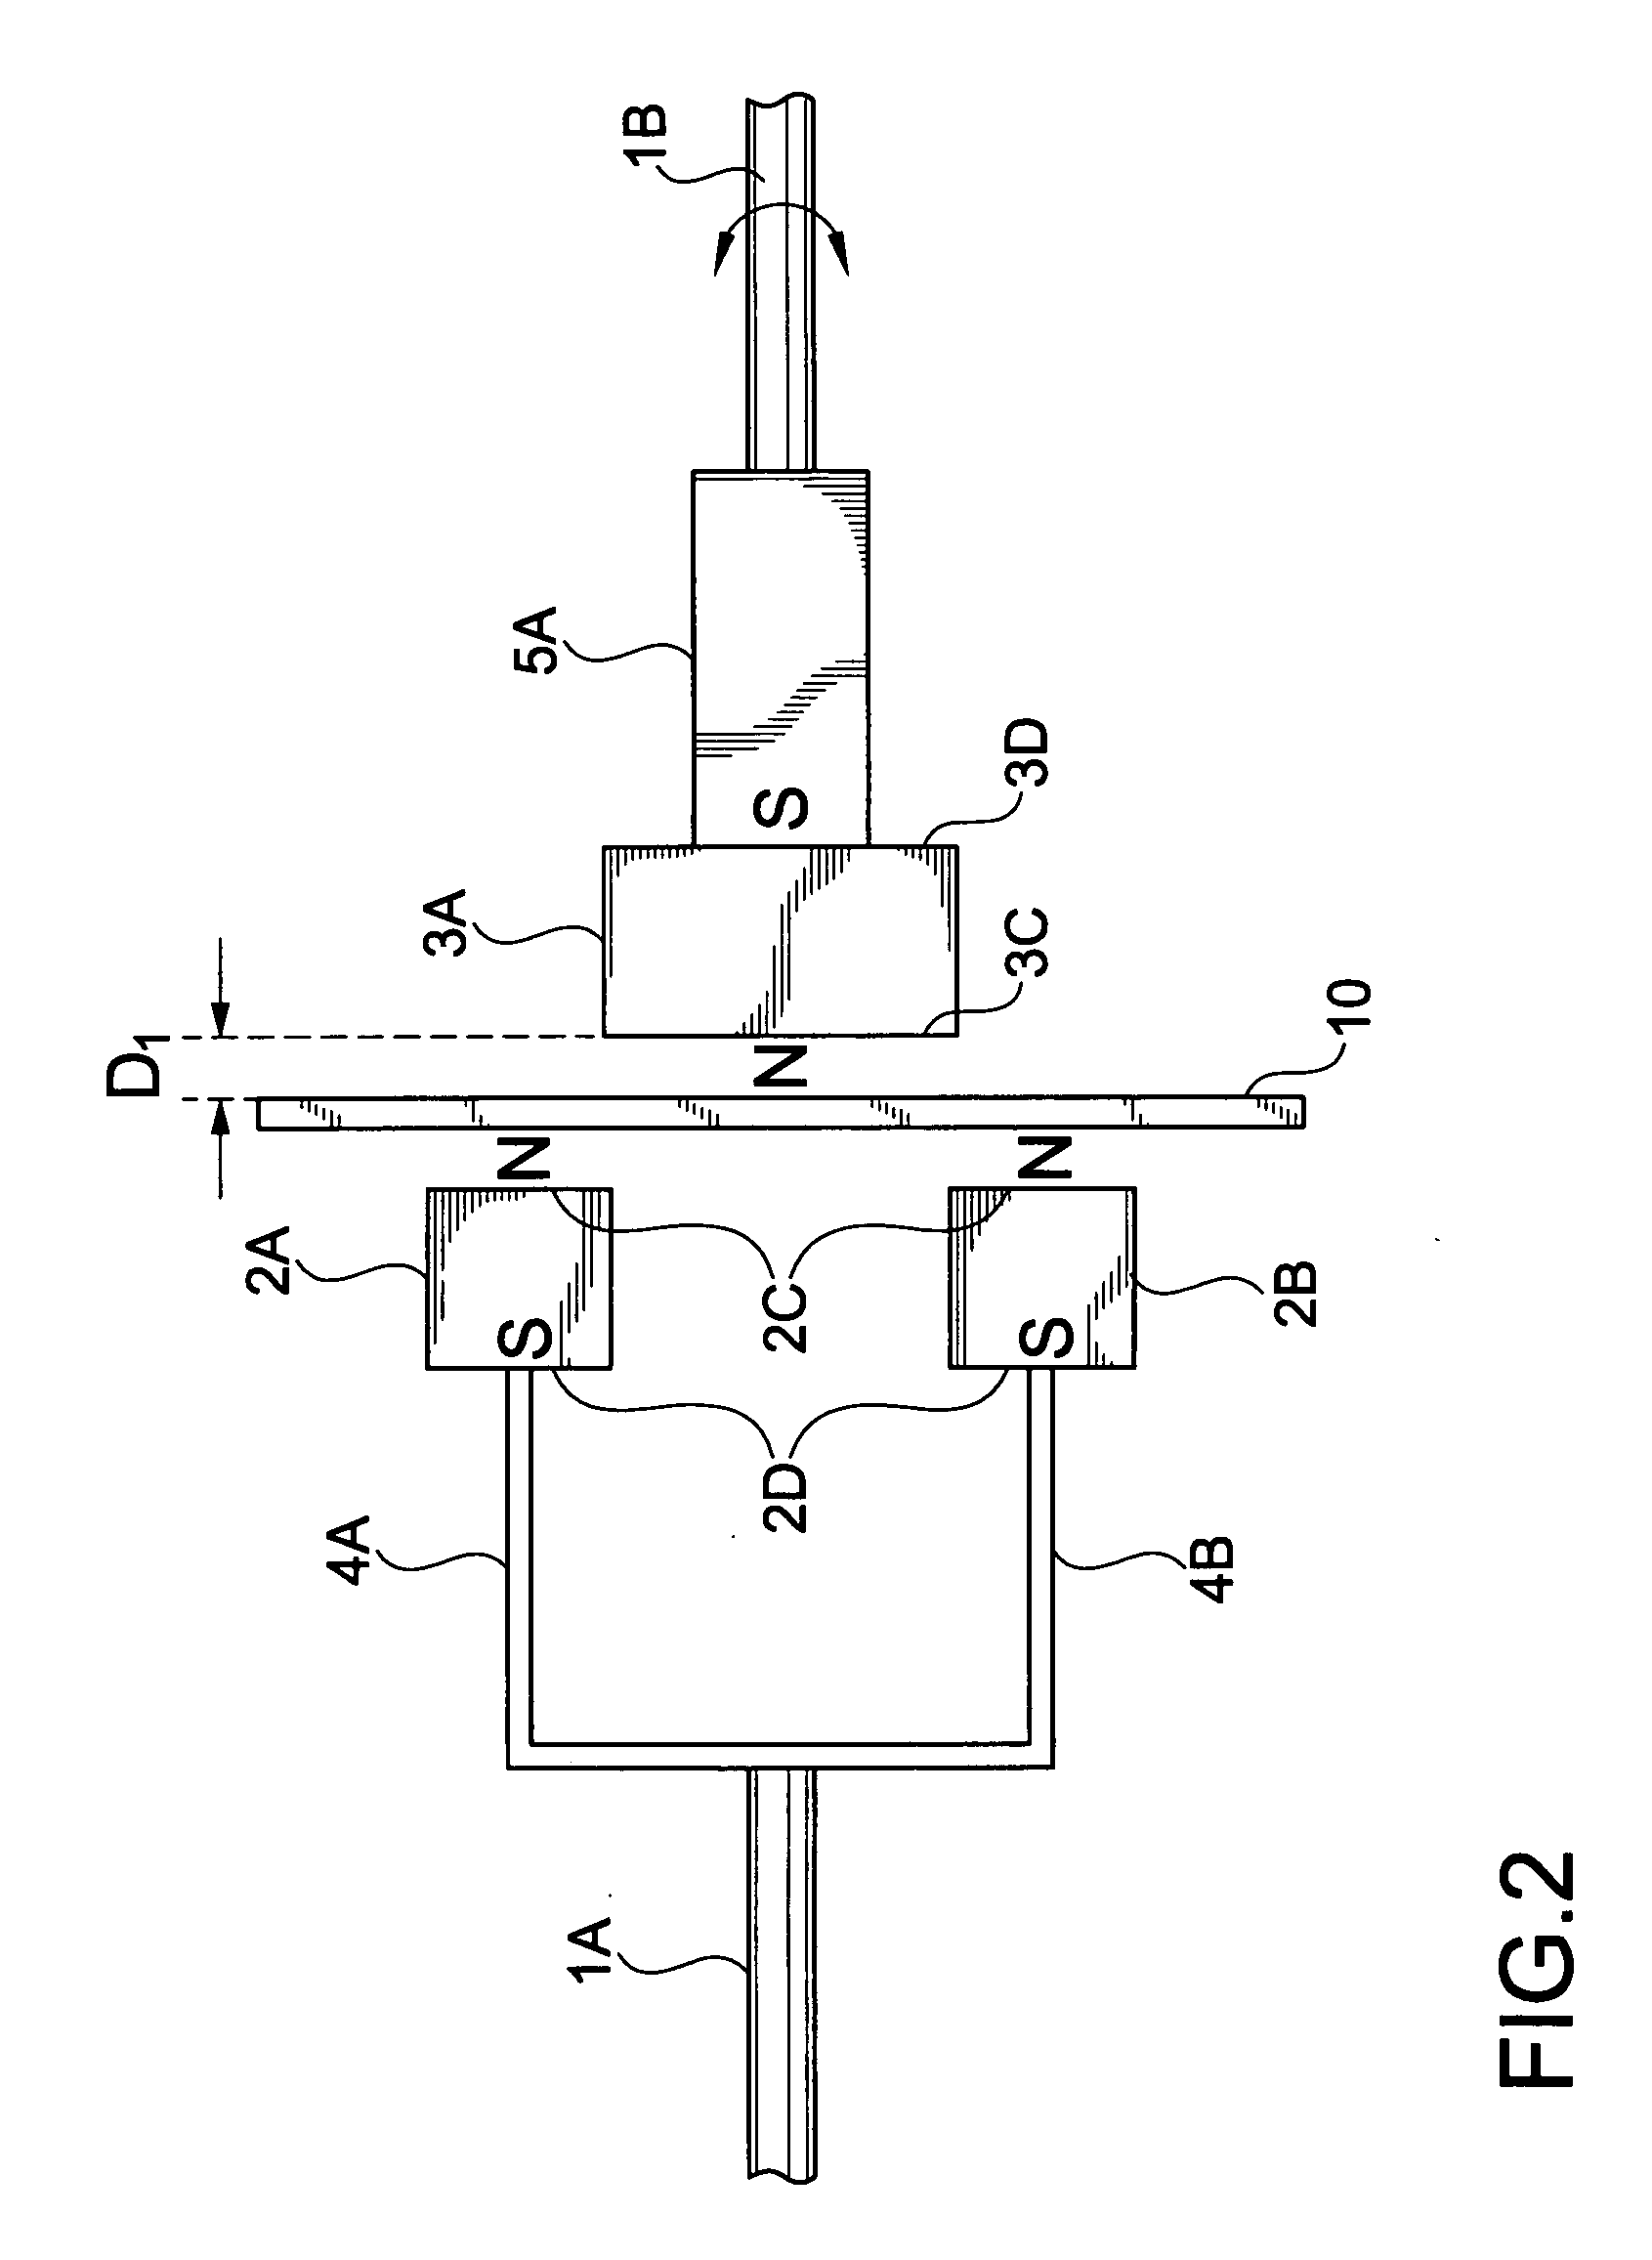 Torque transfer system and method of using the same